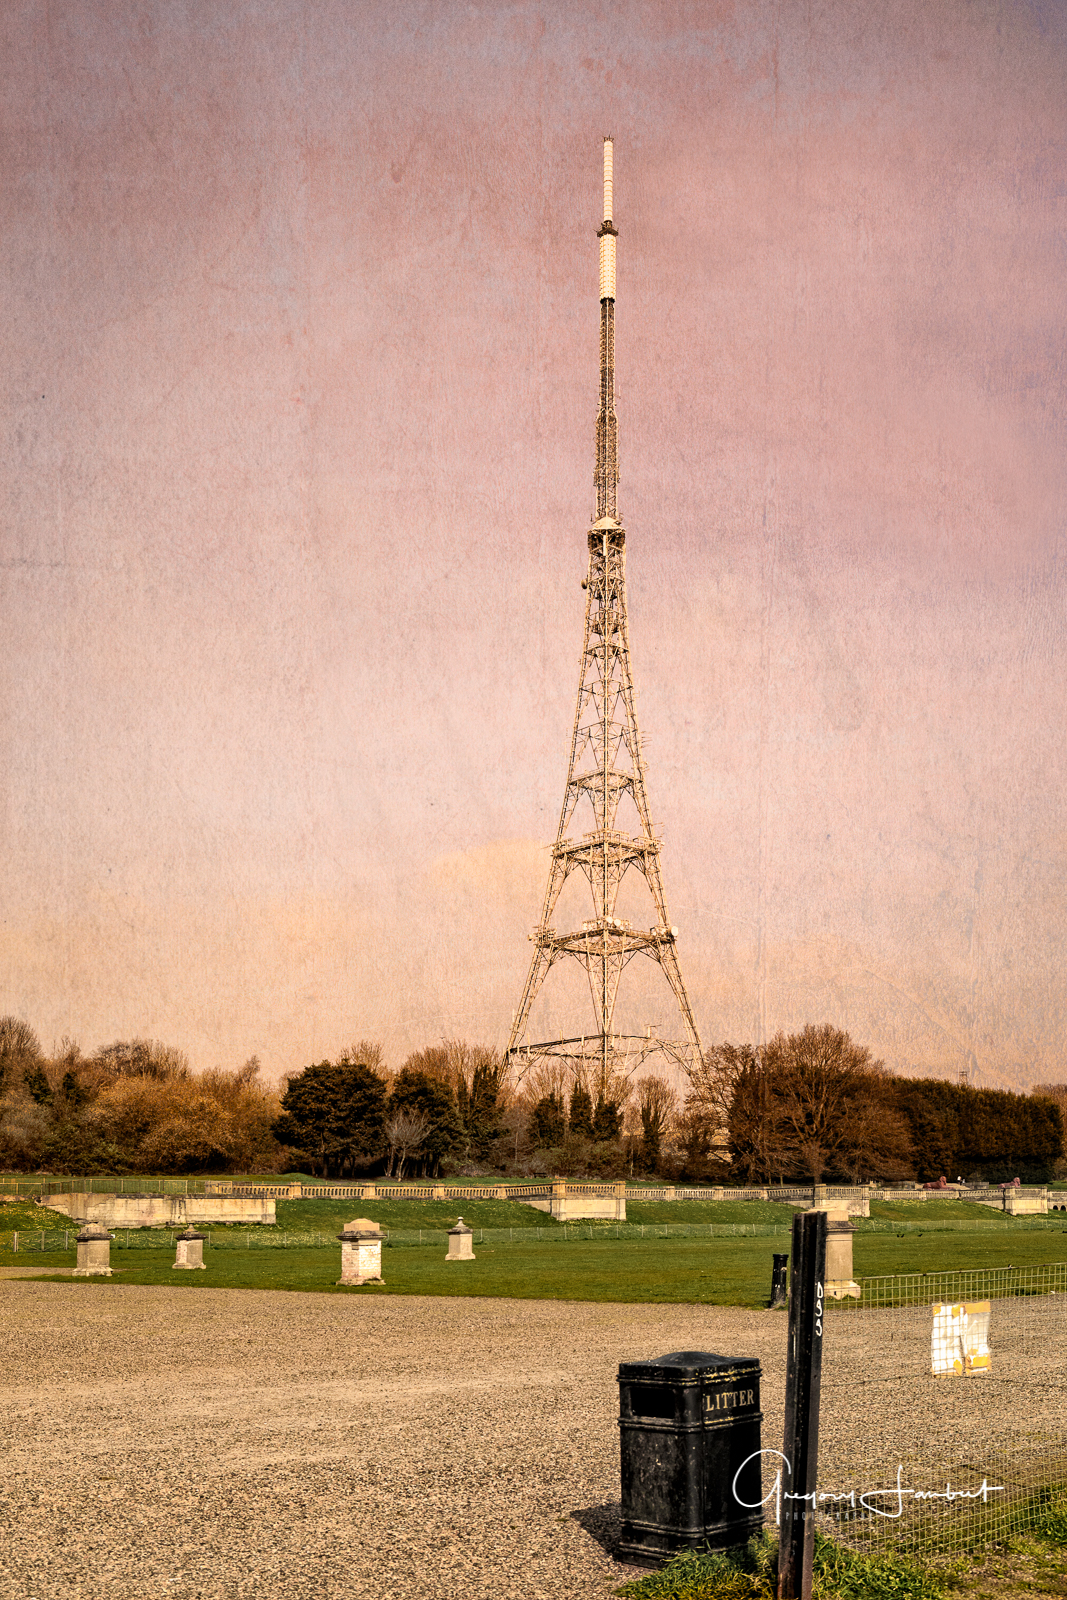 20170327-_61A0102_Bromley_Crystal-Palace-Park_BBC-Transmitter-stands-tall